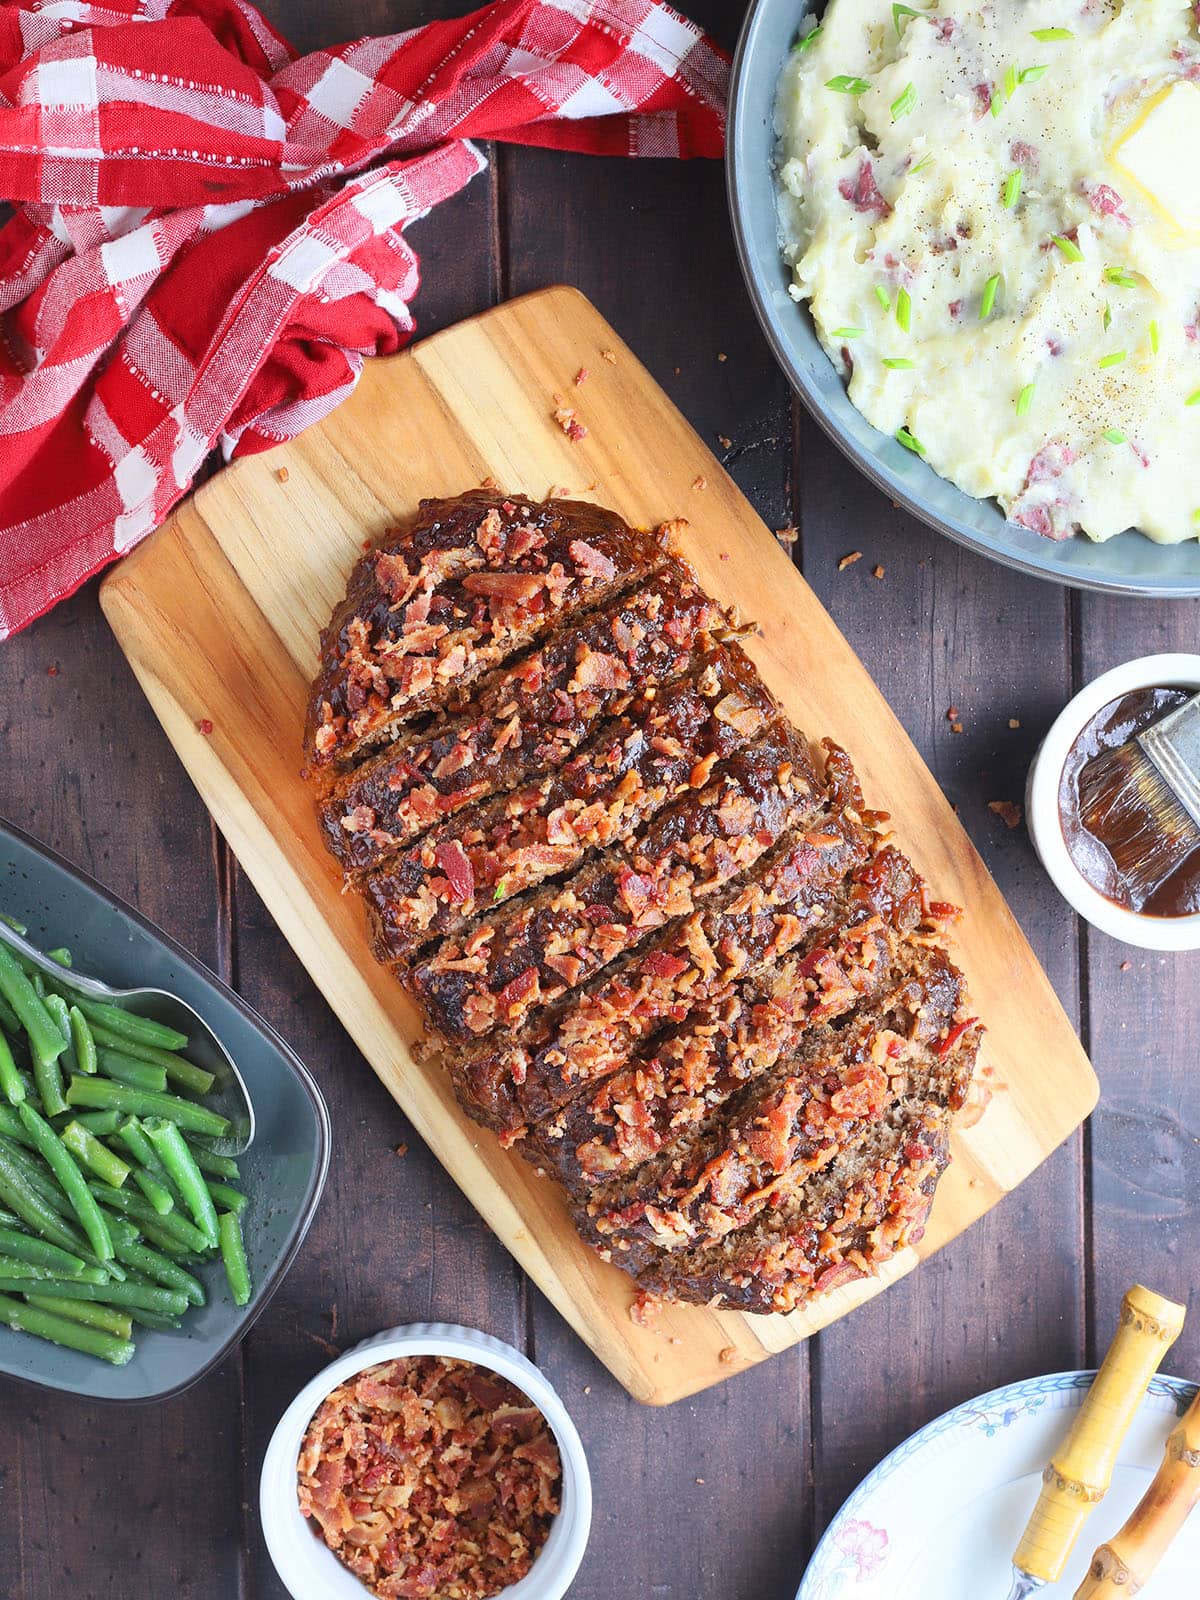 Sliced BBQ meatloaf on a wooden cutting board.